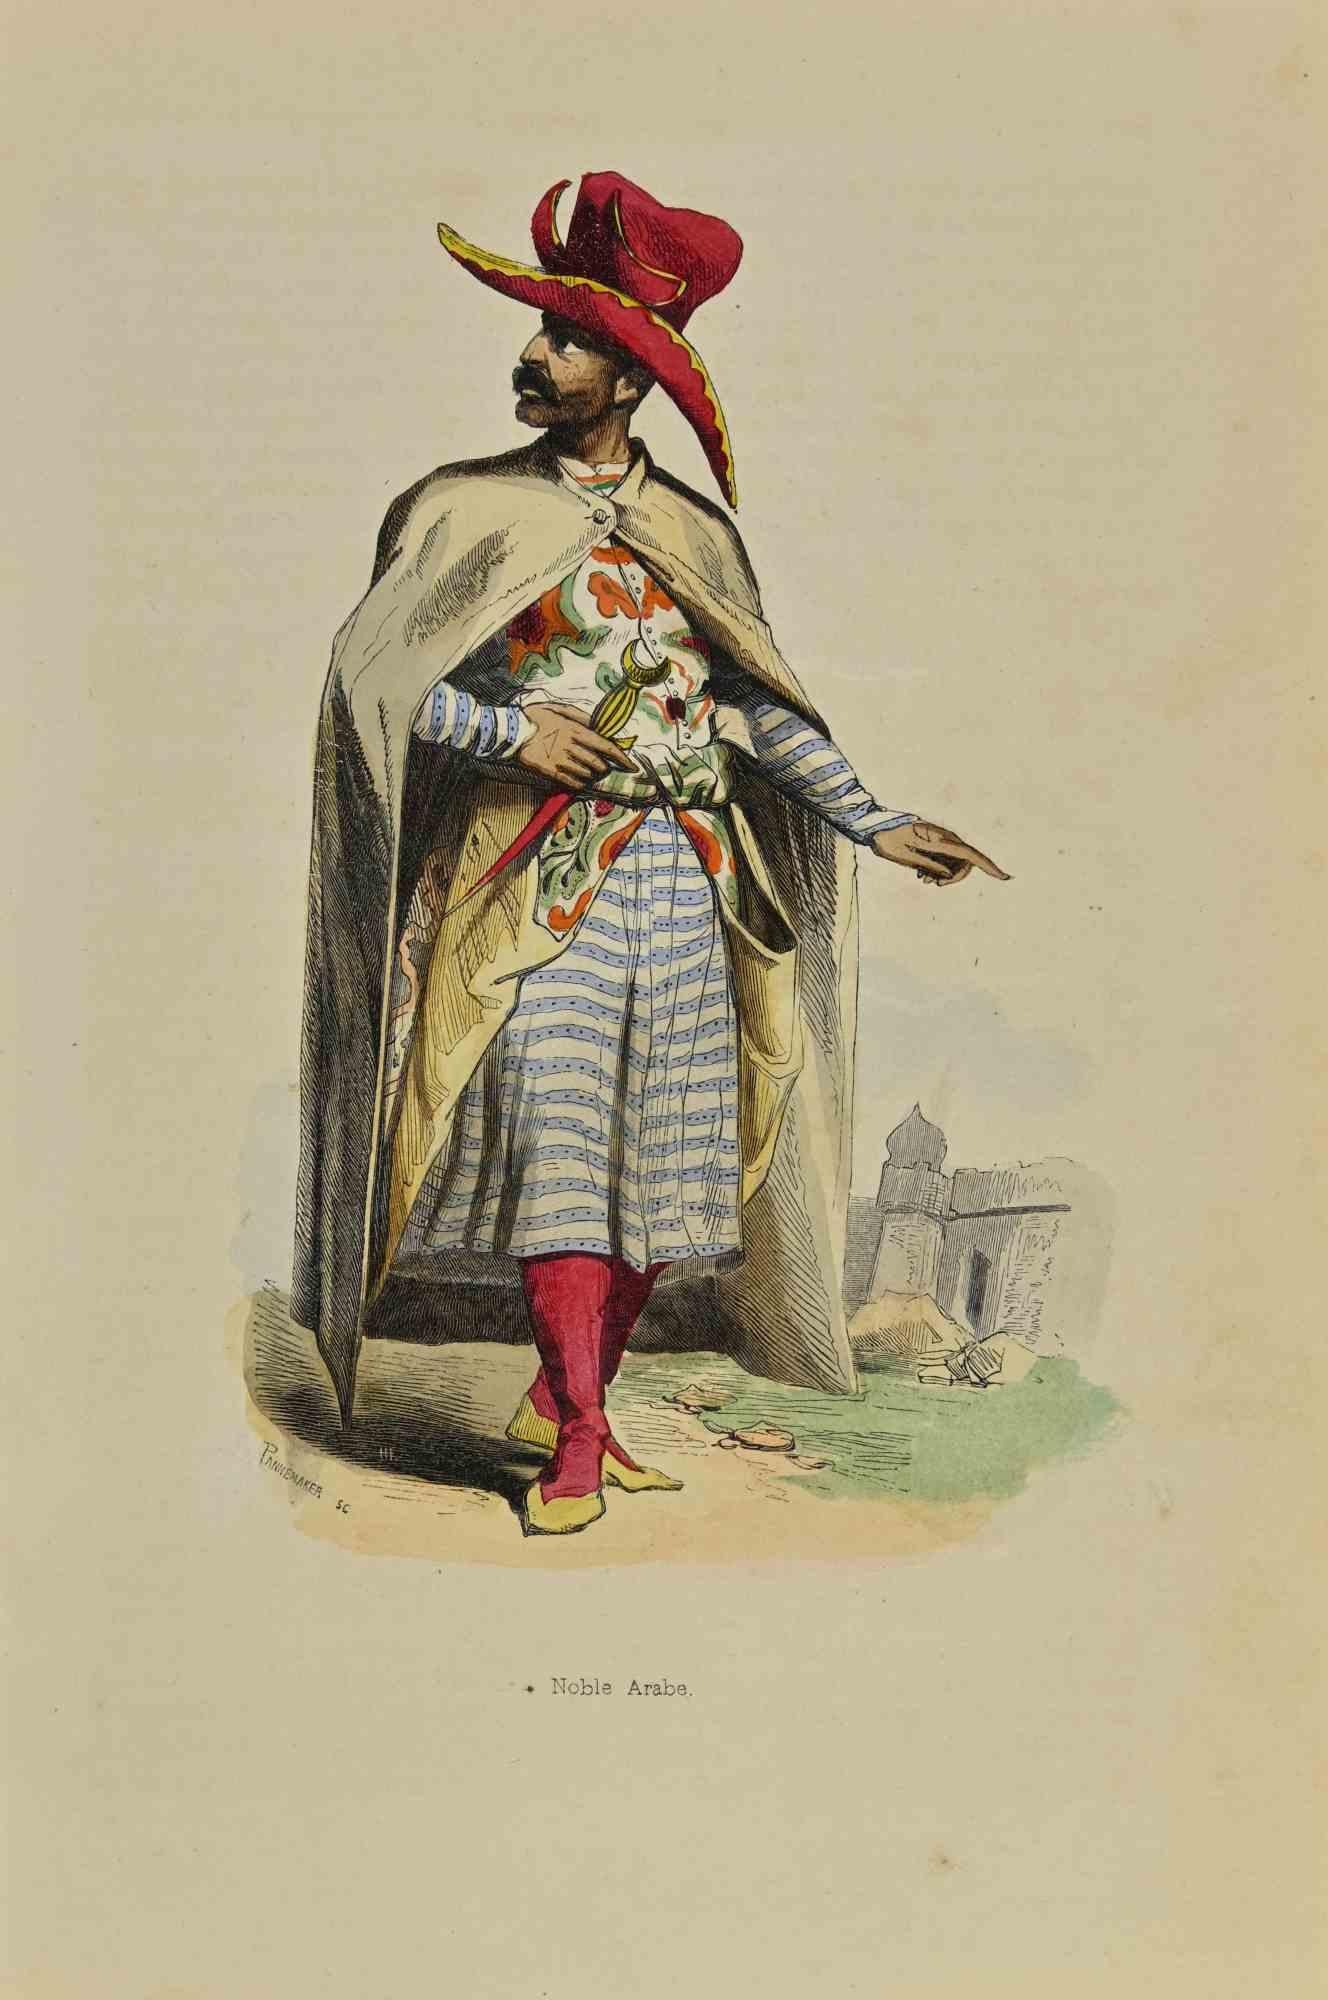 Noble Arab is a lithograph made by Auguste Wahlen in 1844.

Hand colored.

Good condition.

At the center of the artwork is the original title "Noble Arabe".

The work is part of Suite Moeurs, usages et costumes de tous les peuples du monde, d'après